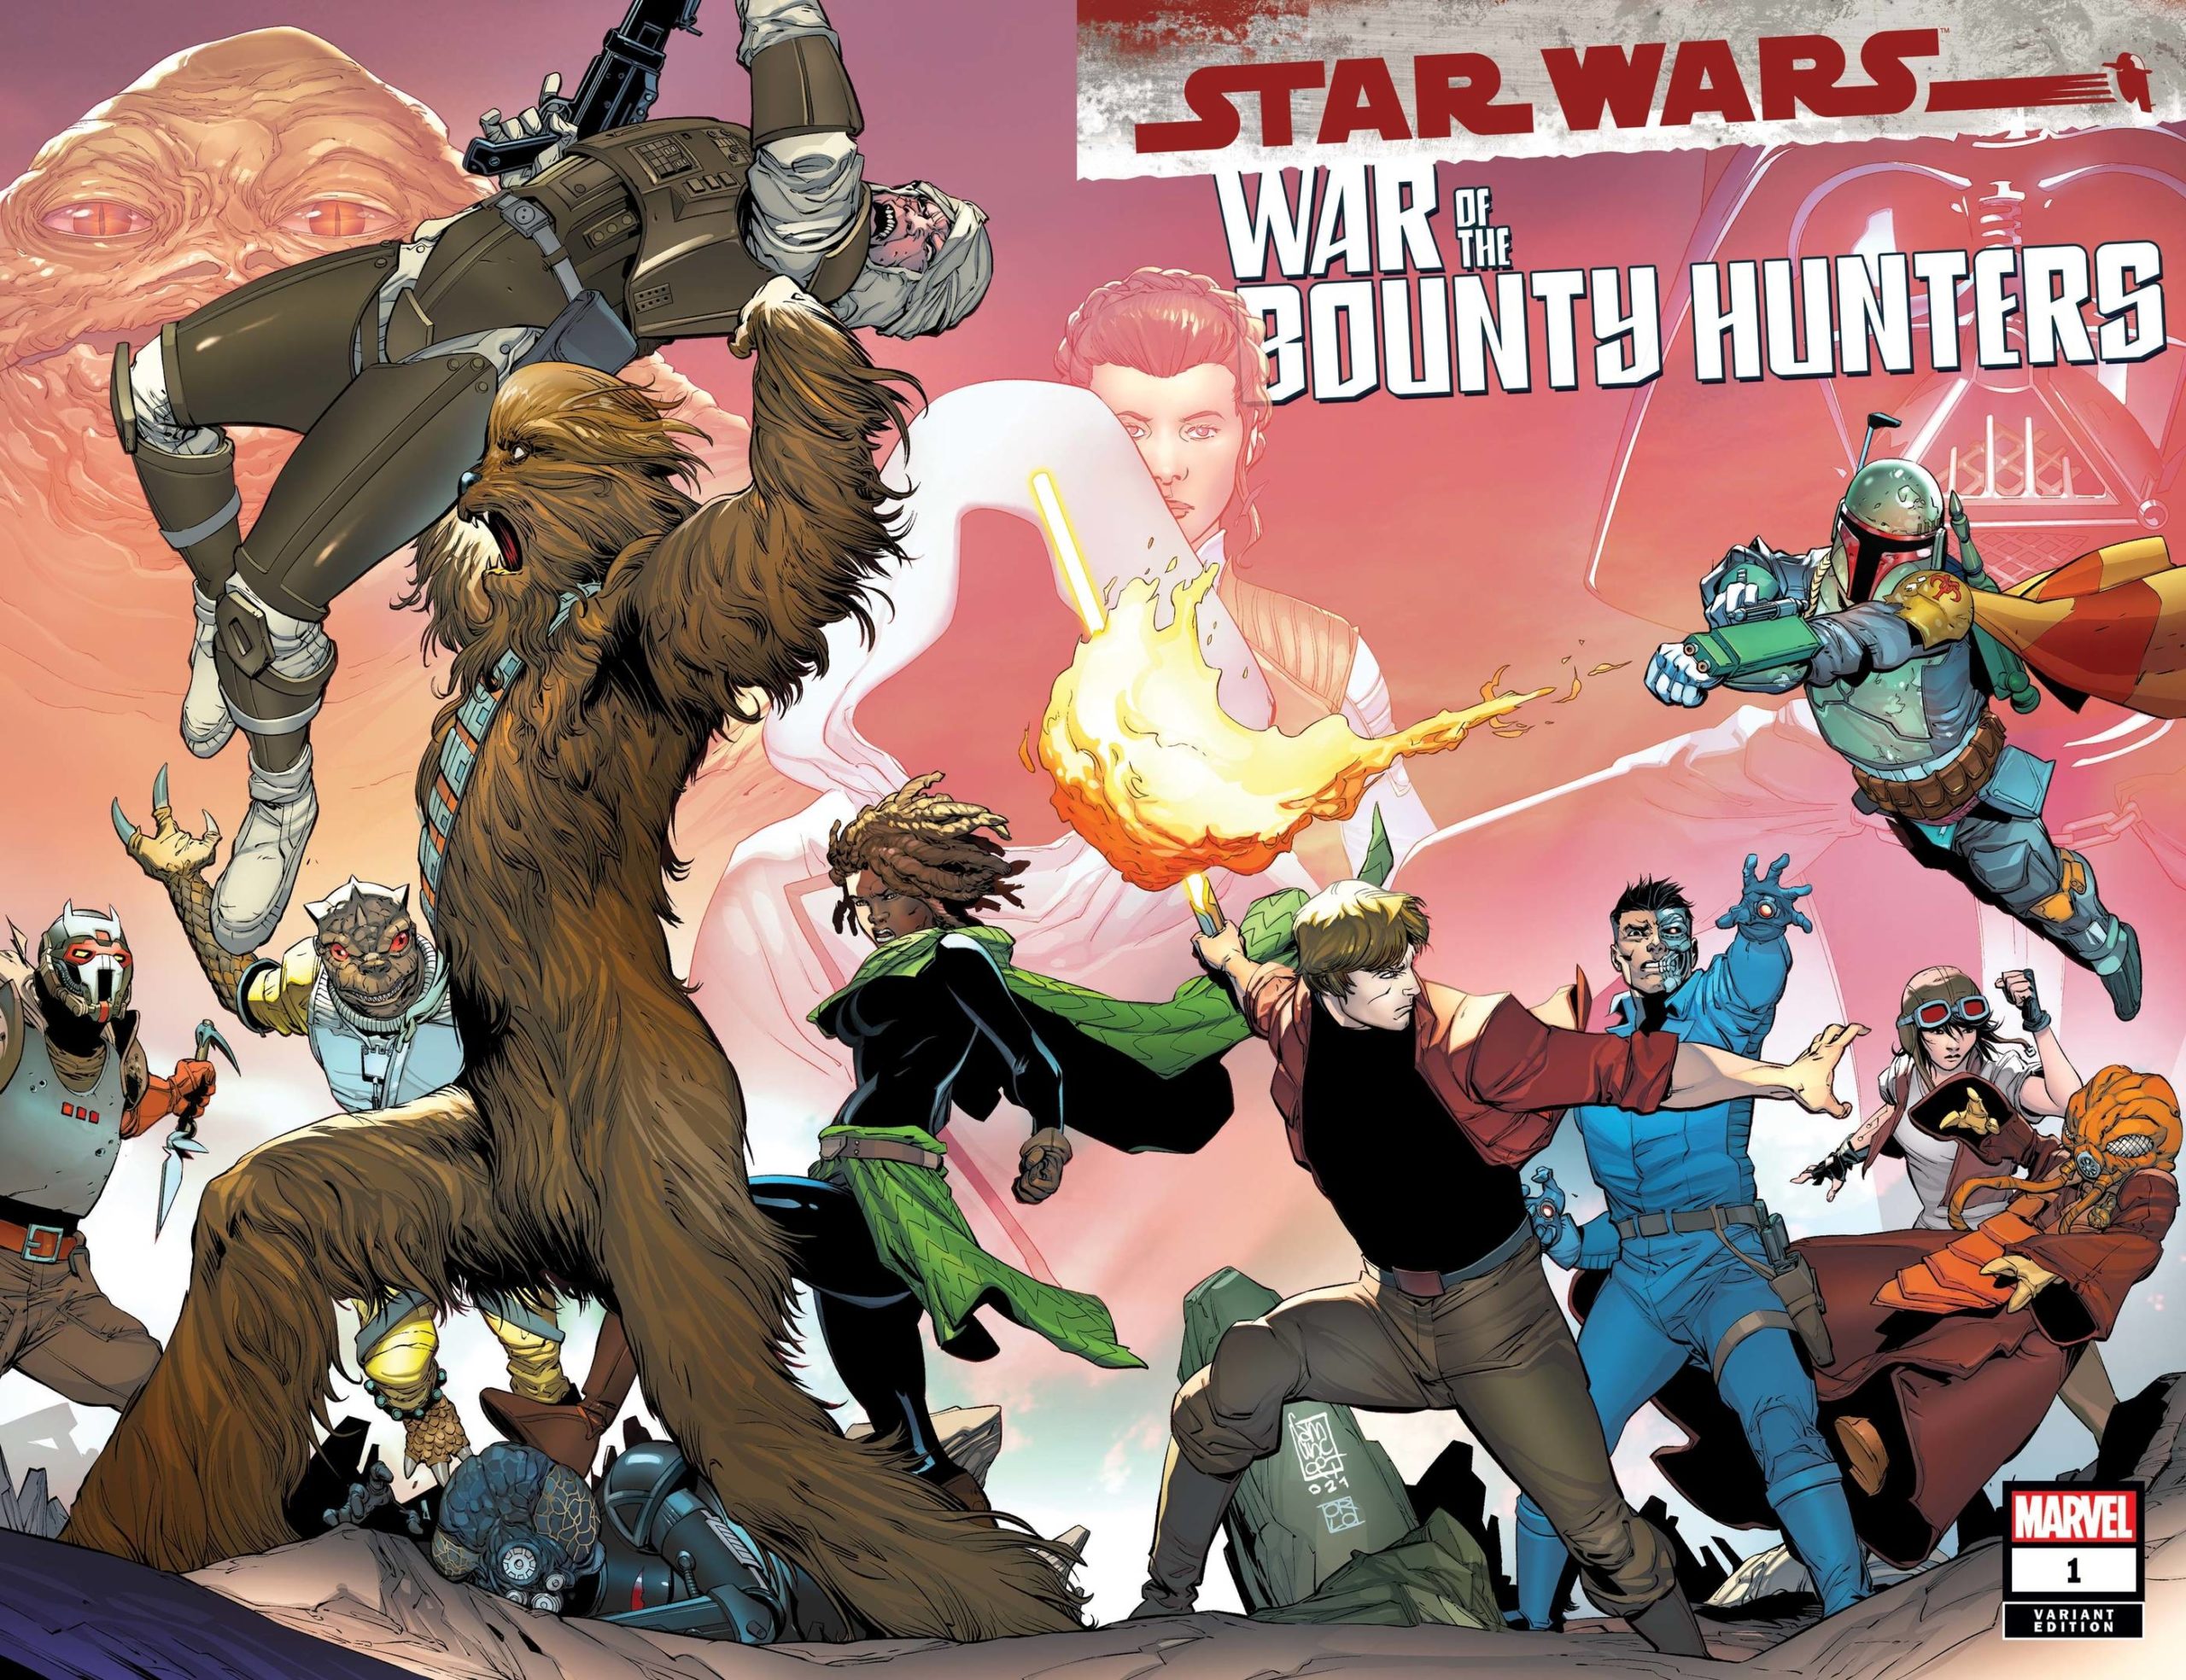 War of the Bounty Hunters #1 (Giuseppe Camuncoli Wraparound Variant Cover) (02.06.2021)